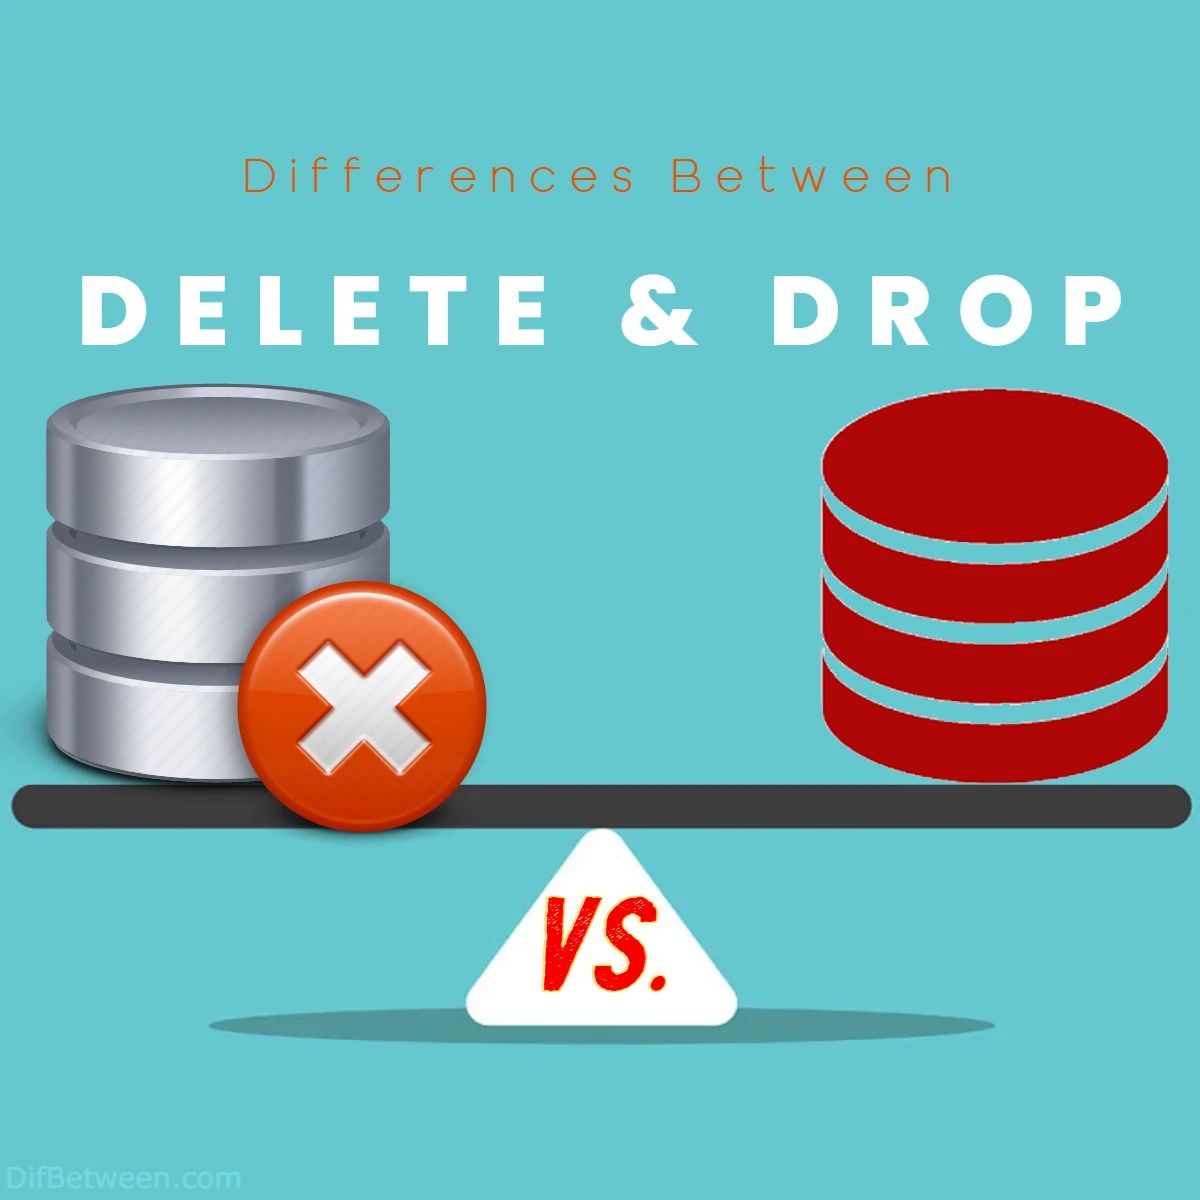 Differences Between DELETE and DROP